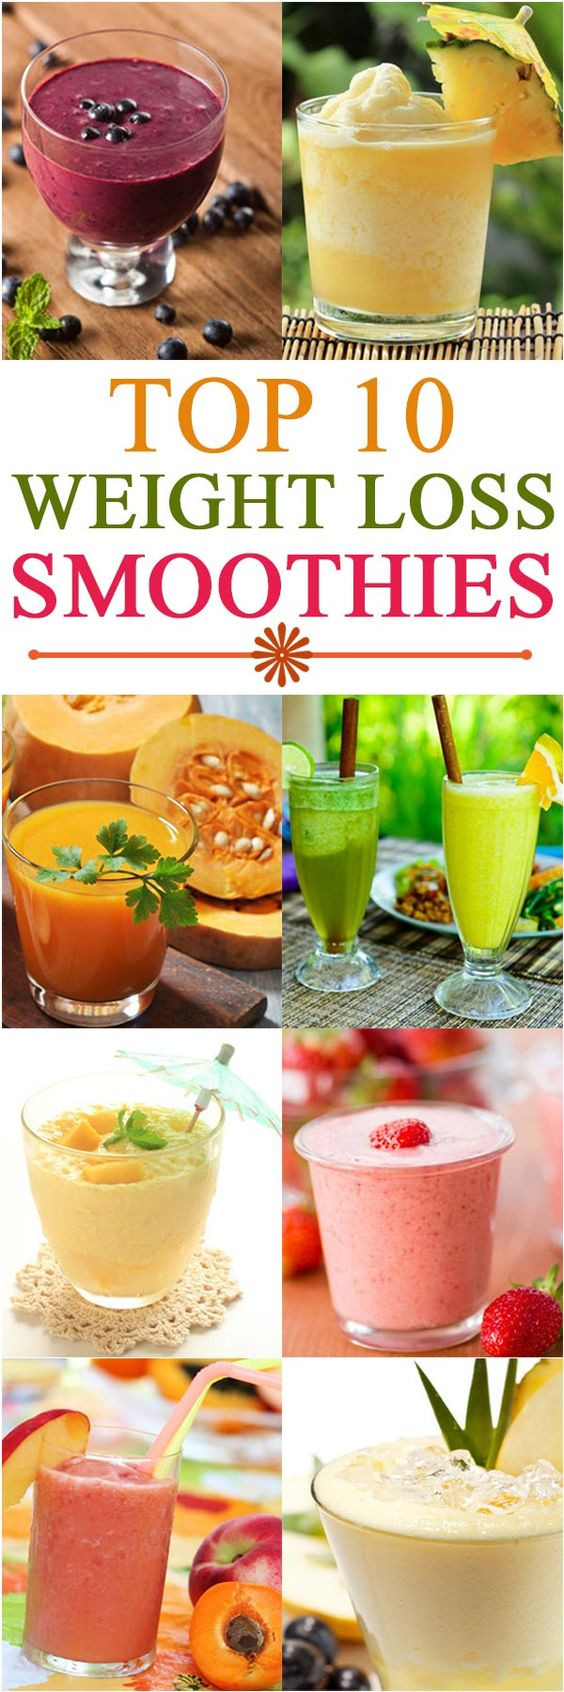 Veggie Smoothie Recipes For Weight Loss
 Your Weight Loss Prescription Make e For Breakfast